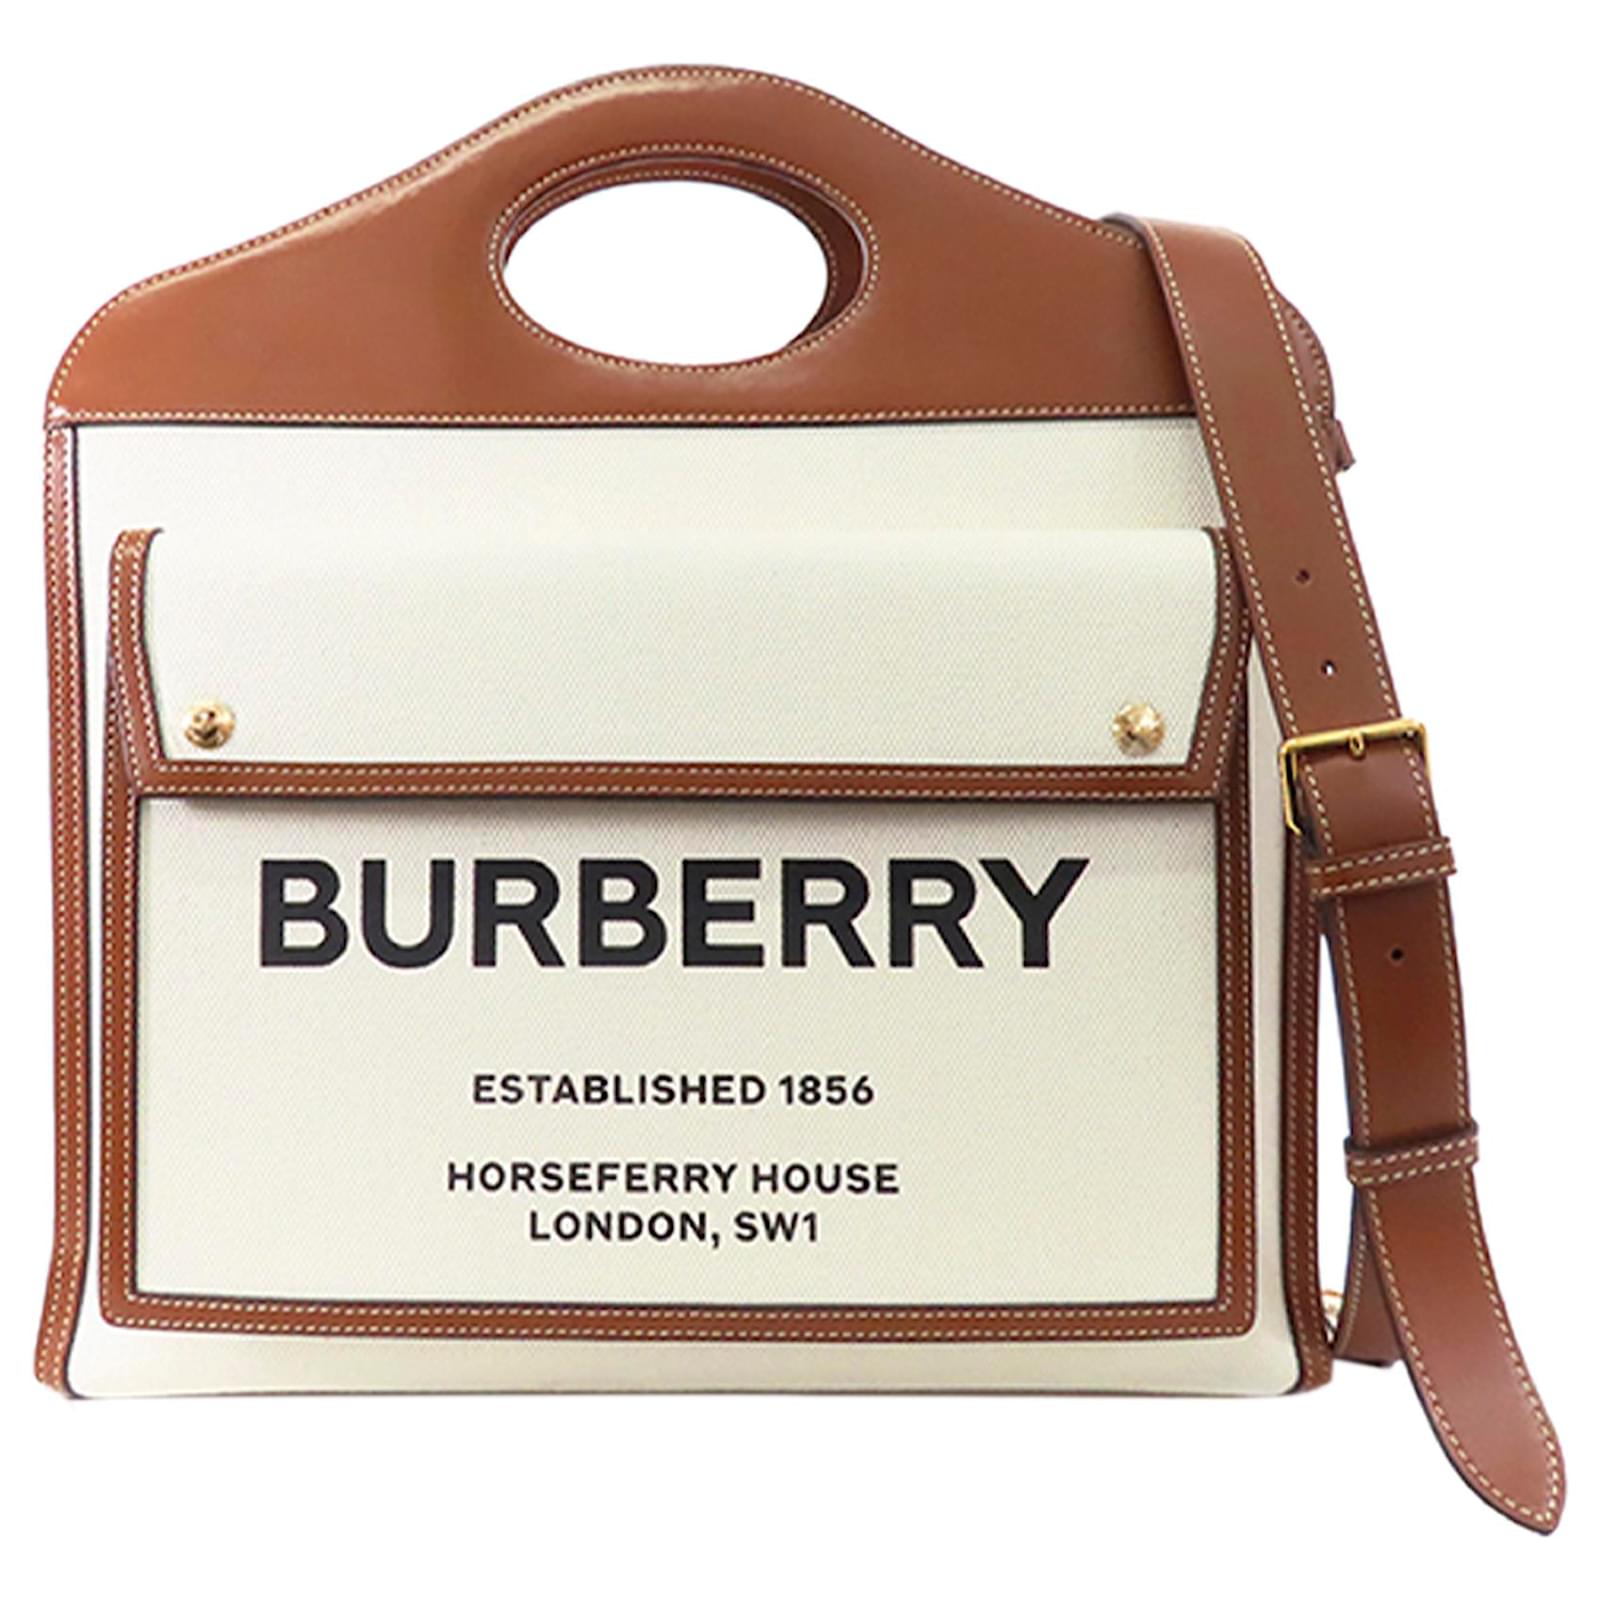 Burberry Small Pocket White And Brown Canvas And Leather Tote Bag New